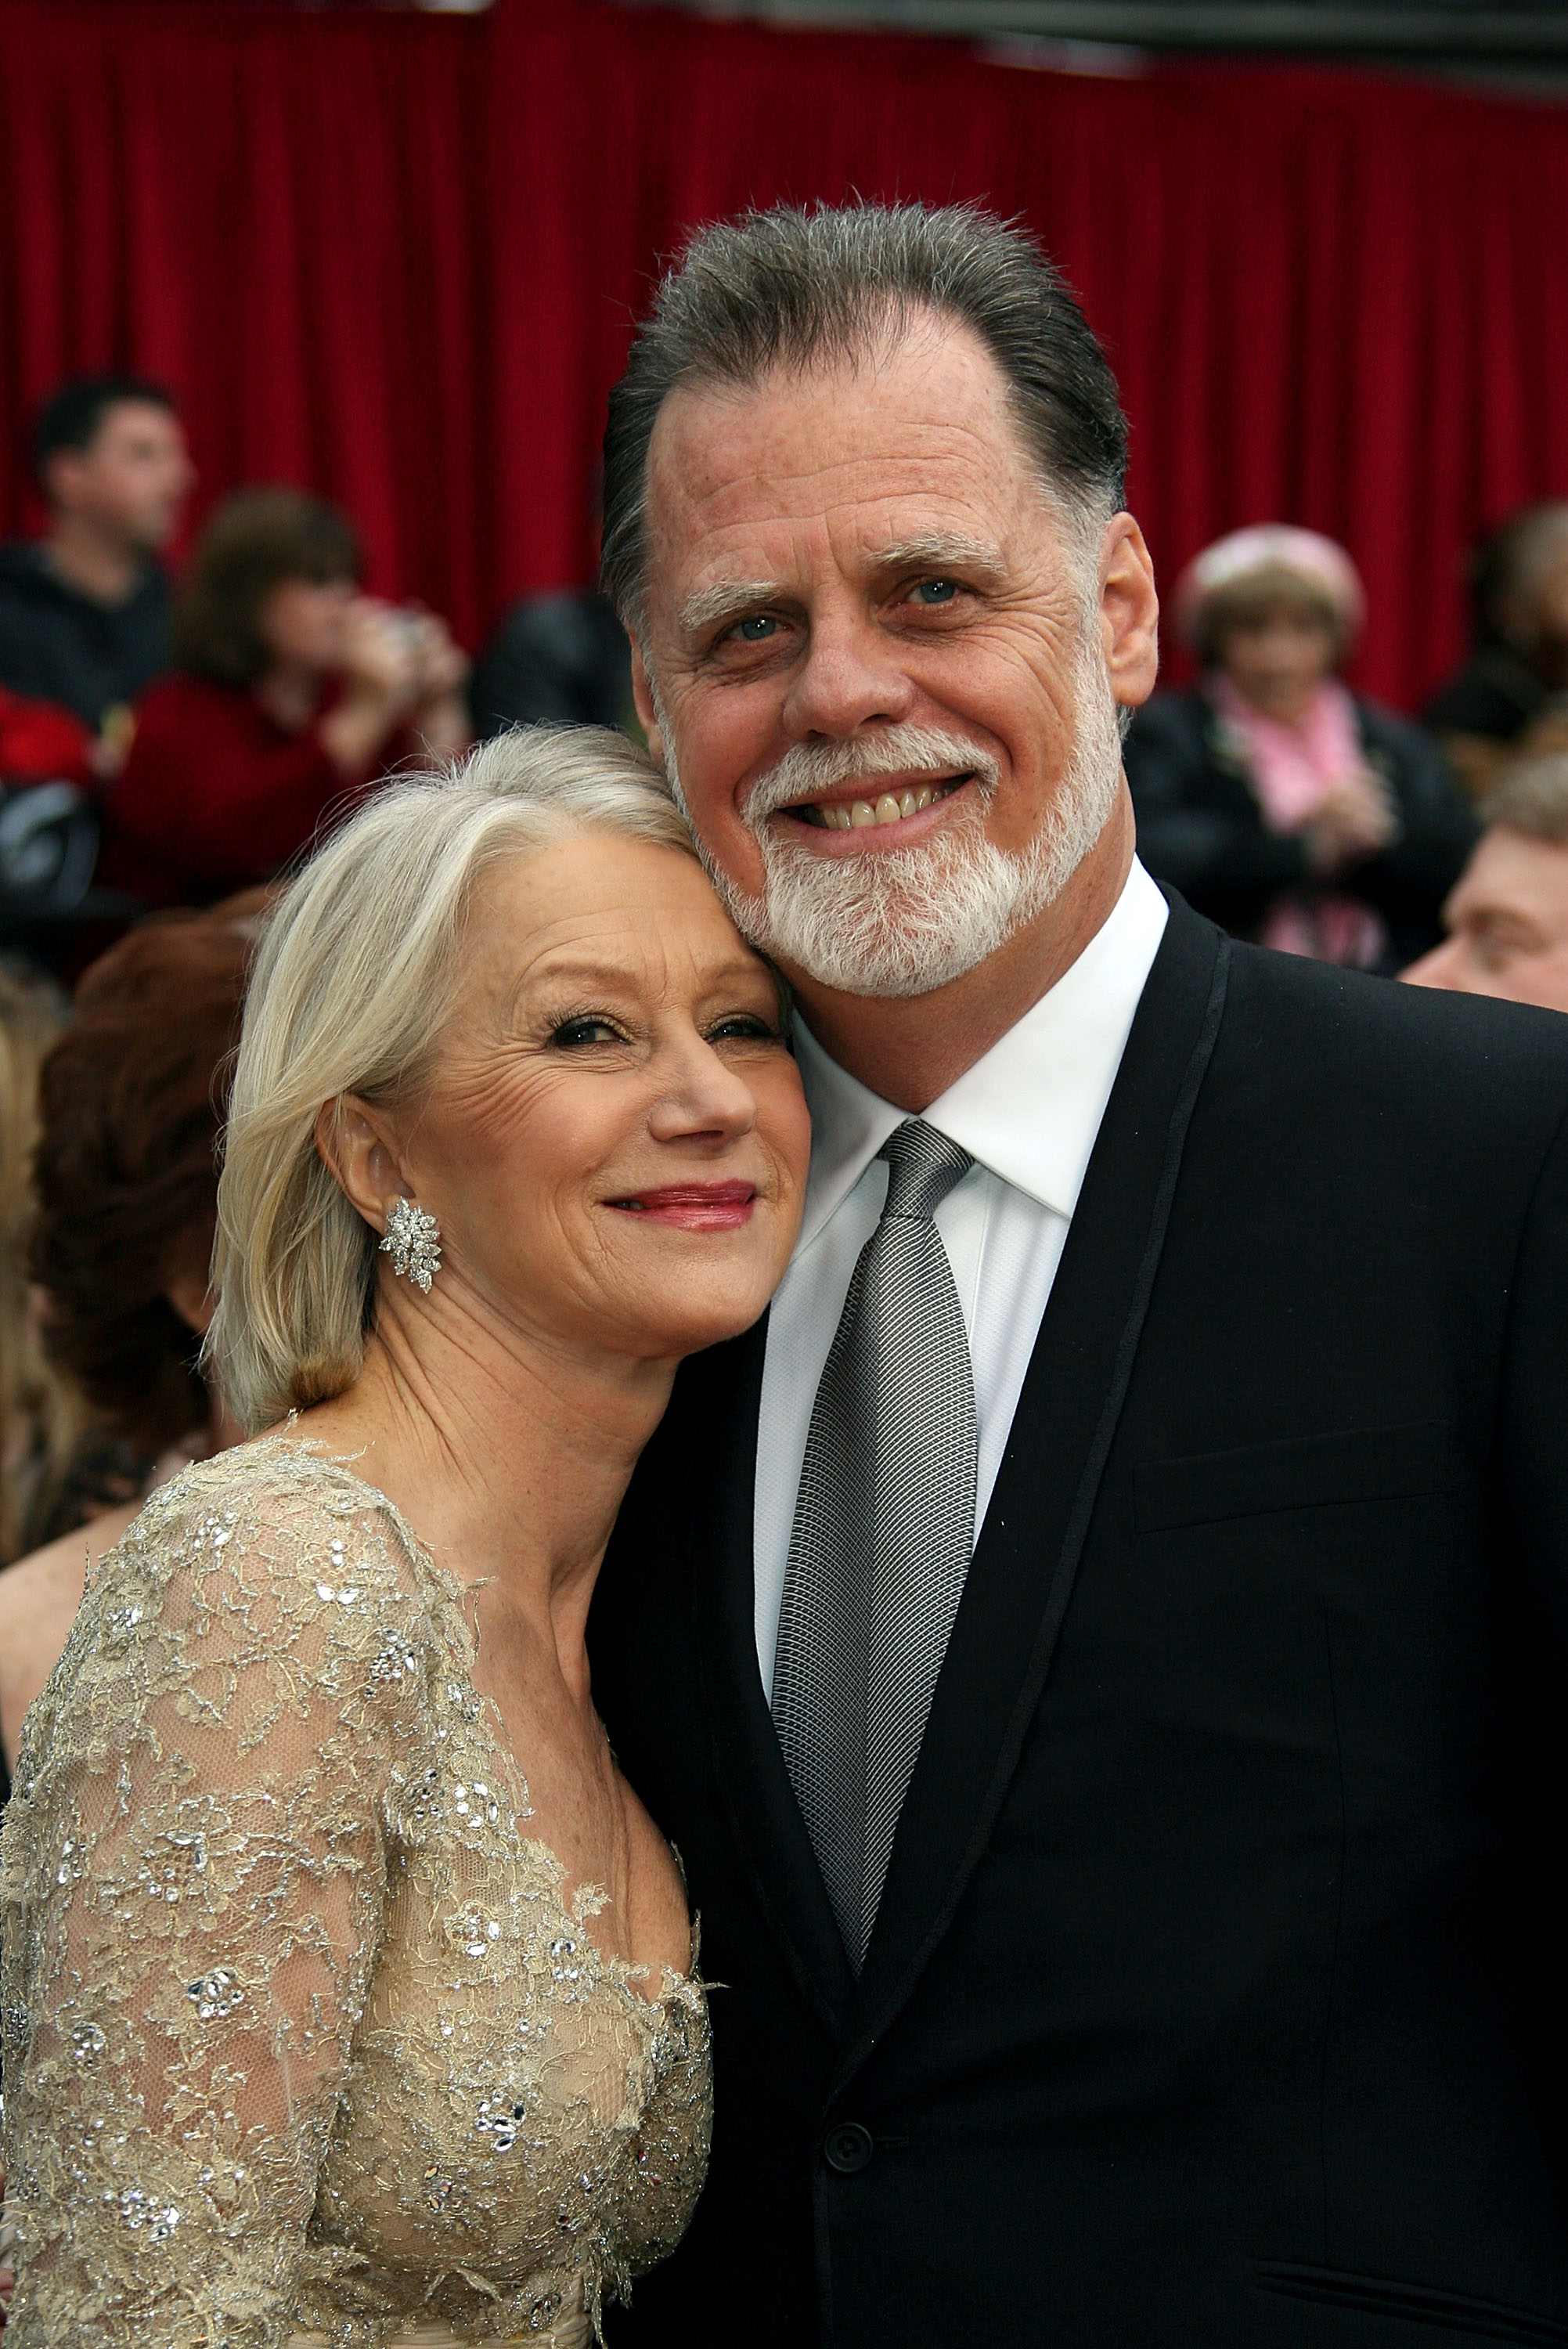 Dame Helen Mirren and husband Taylor Hackford attend the 79th Annual Academy Awards held at the Kodak Theatre, on February 25, 2007, in Hollywood, California. | Source: Getty Images